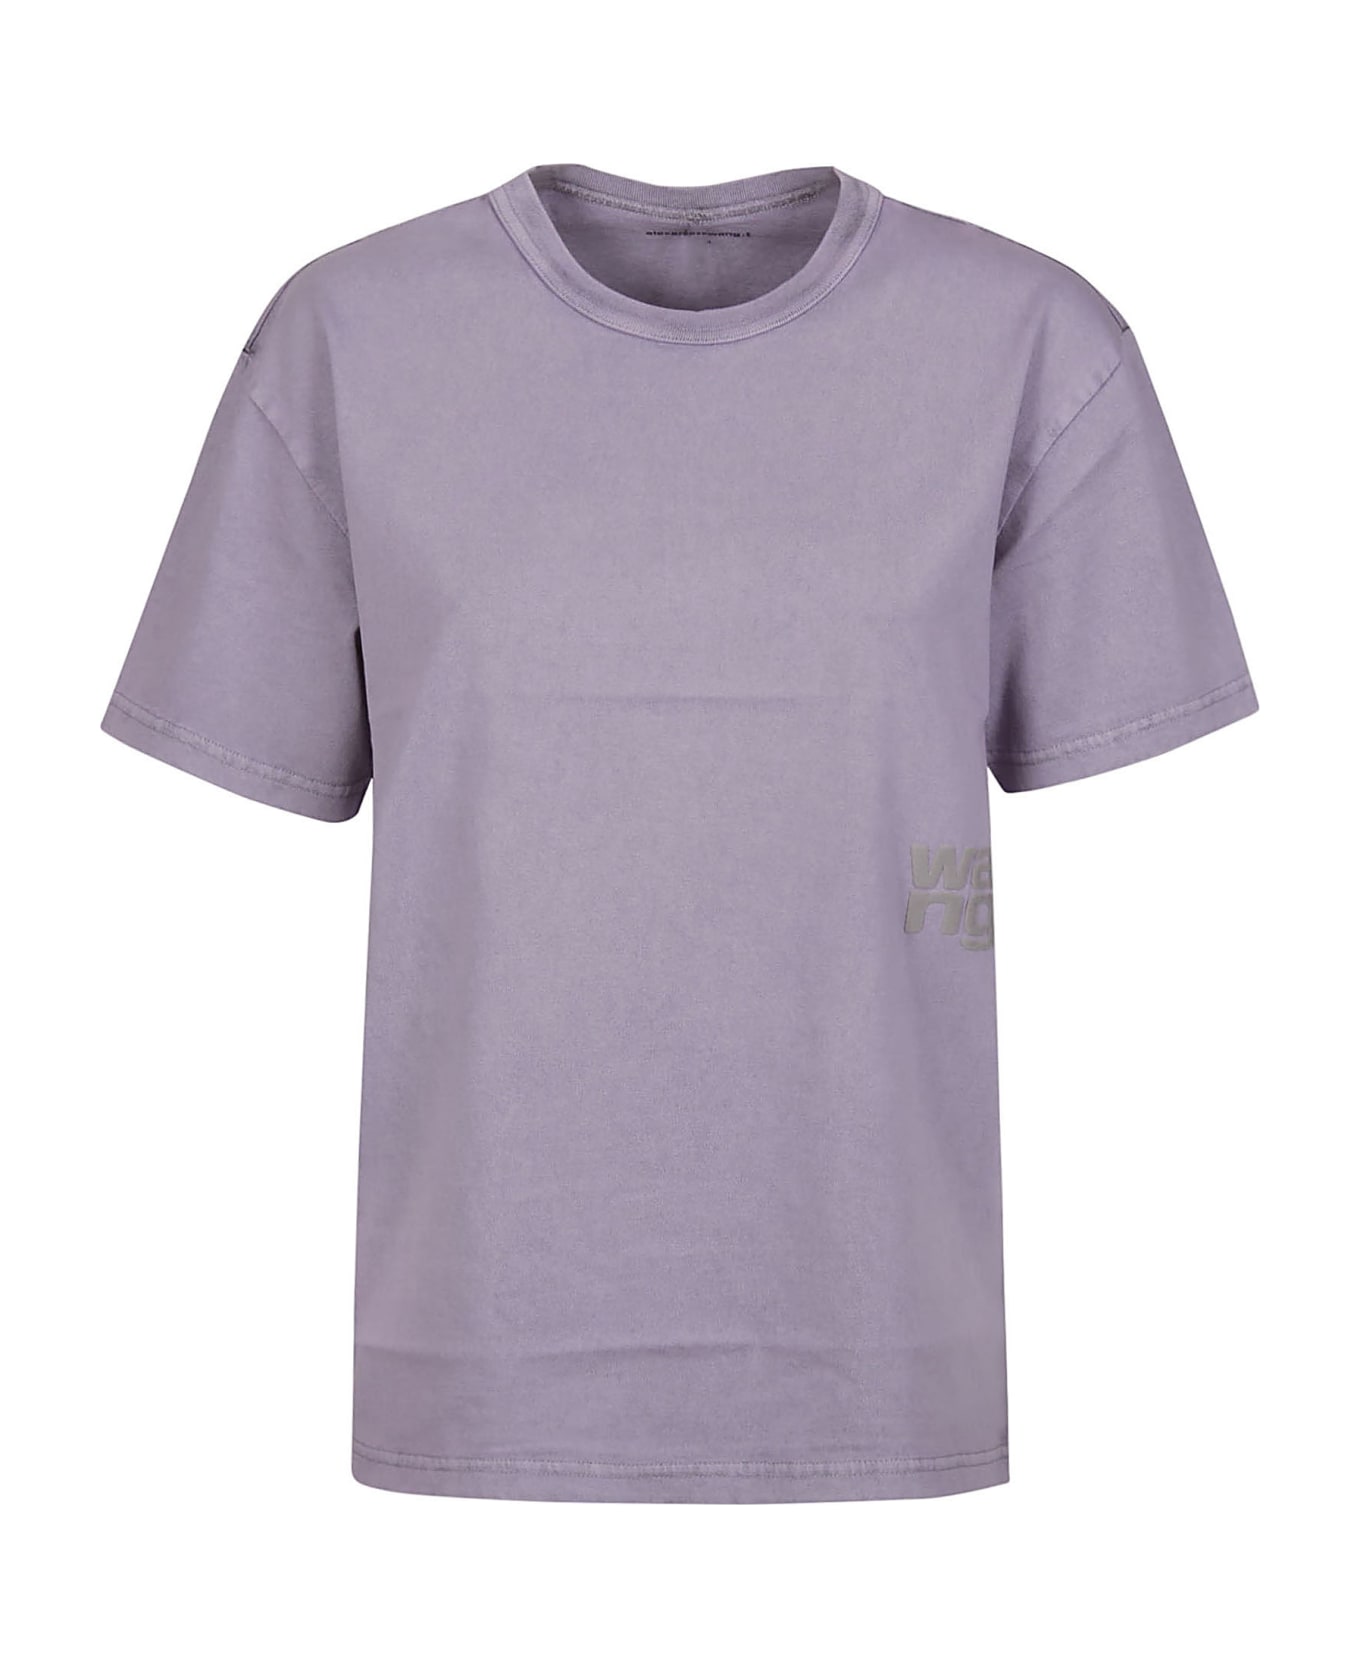 T by Alexander Wang Puff Logo Bound Neck Essential T-shirt - A Acid Pink Lavender Tシャツ